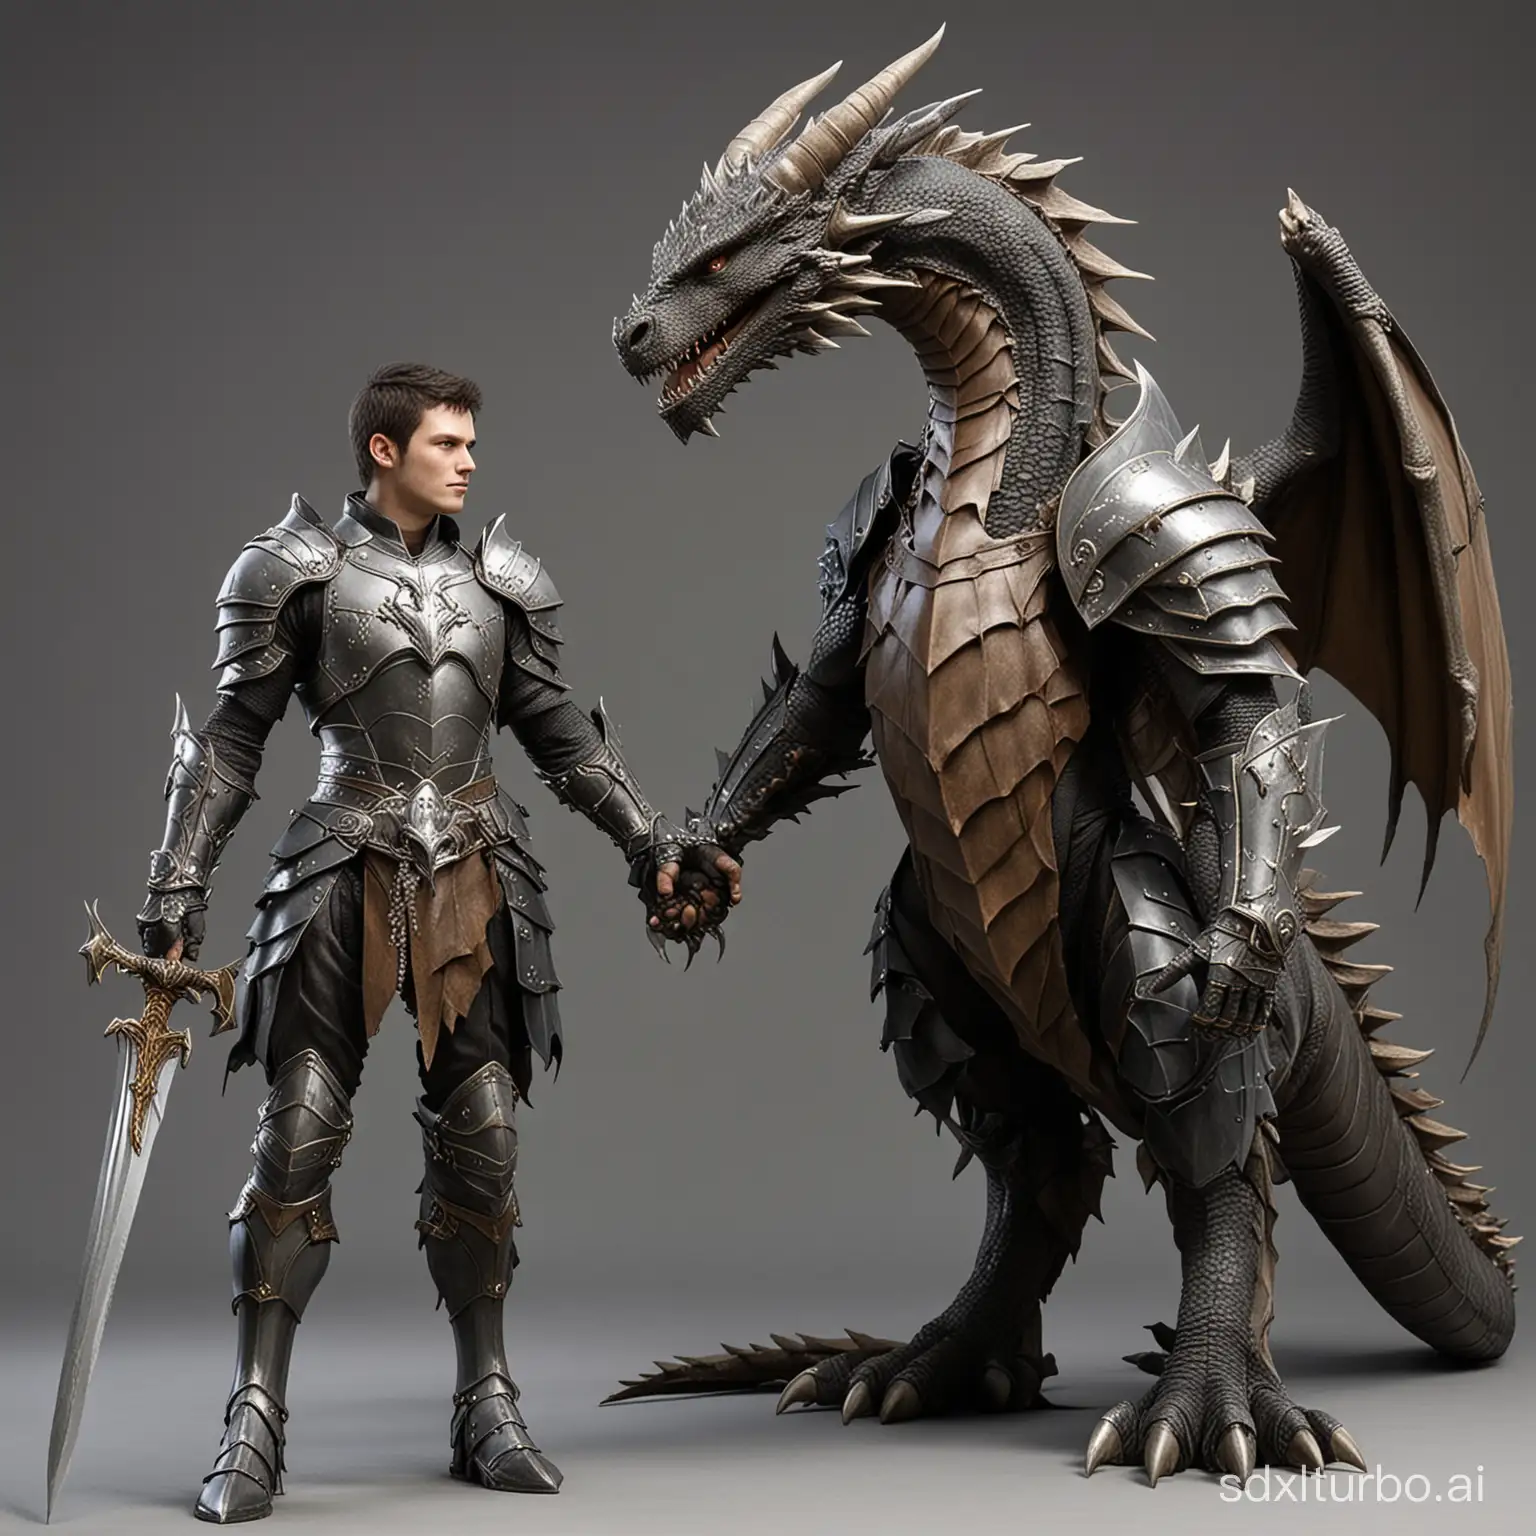 Dragon-and-Human-Knight-Friendship-Mythical-Creature-and-Warrior-Bonding-in-Harmony